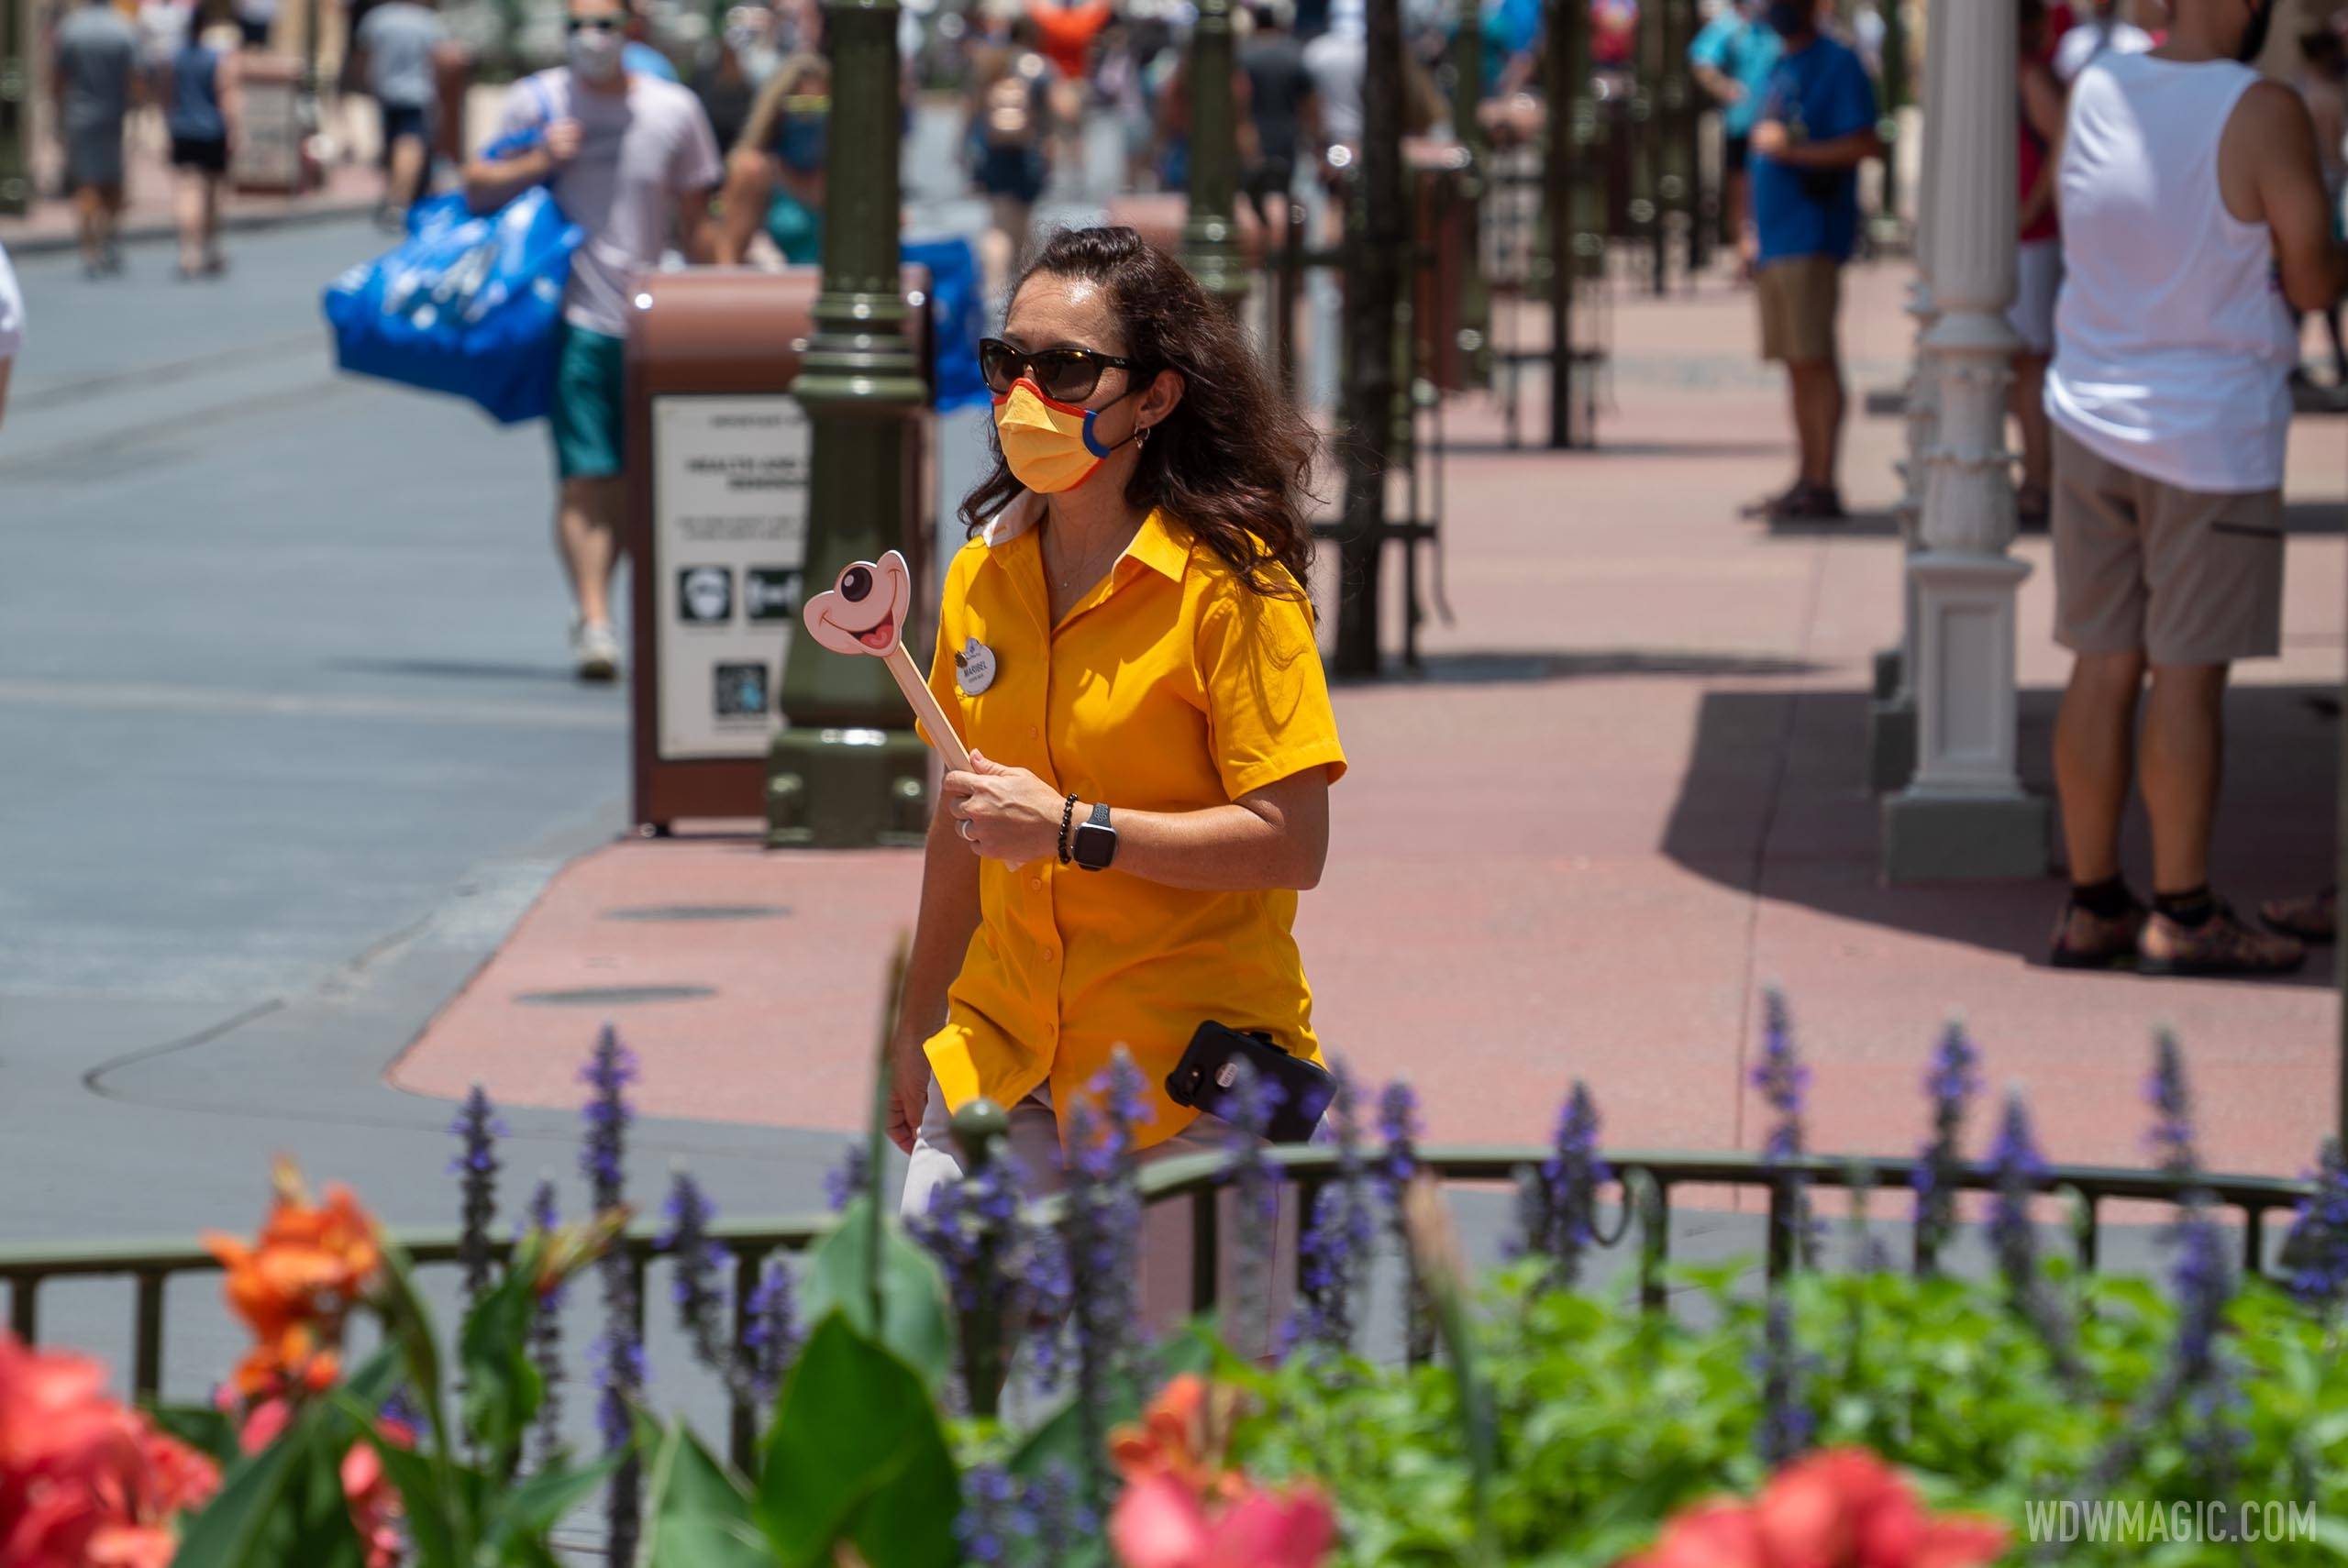 Special teams of Cast Members enforce mask use at Magic Kingdom in July 2020